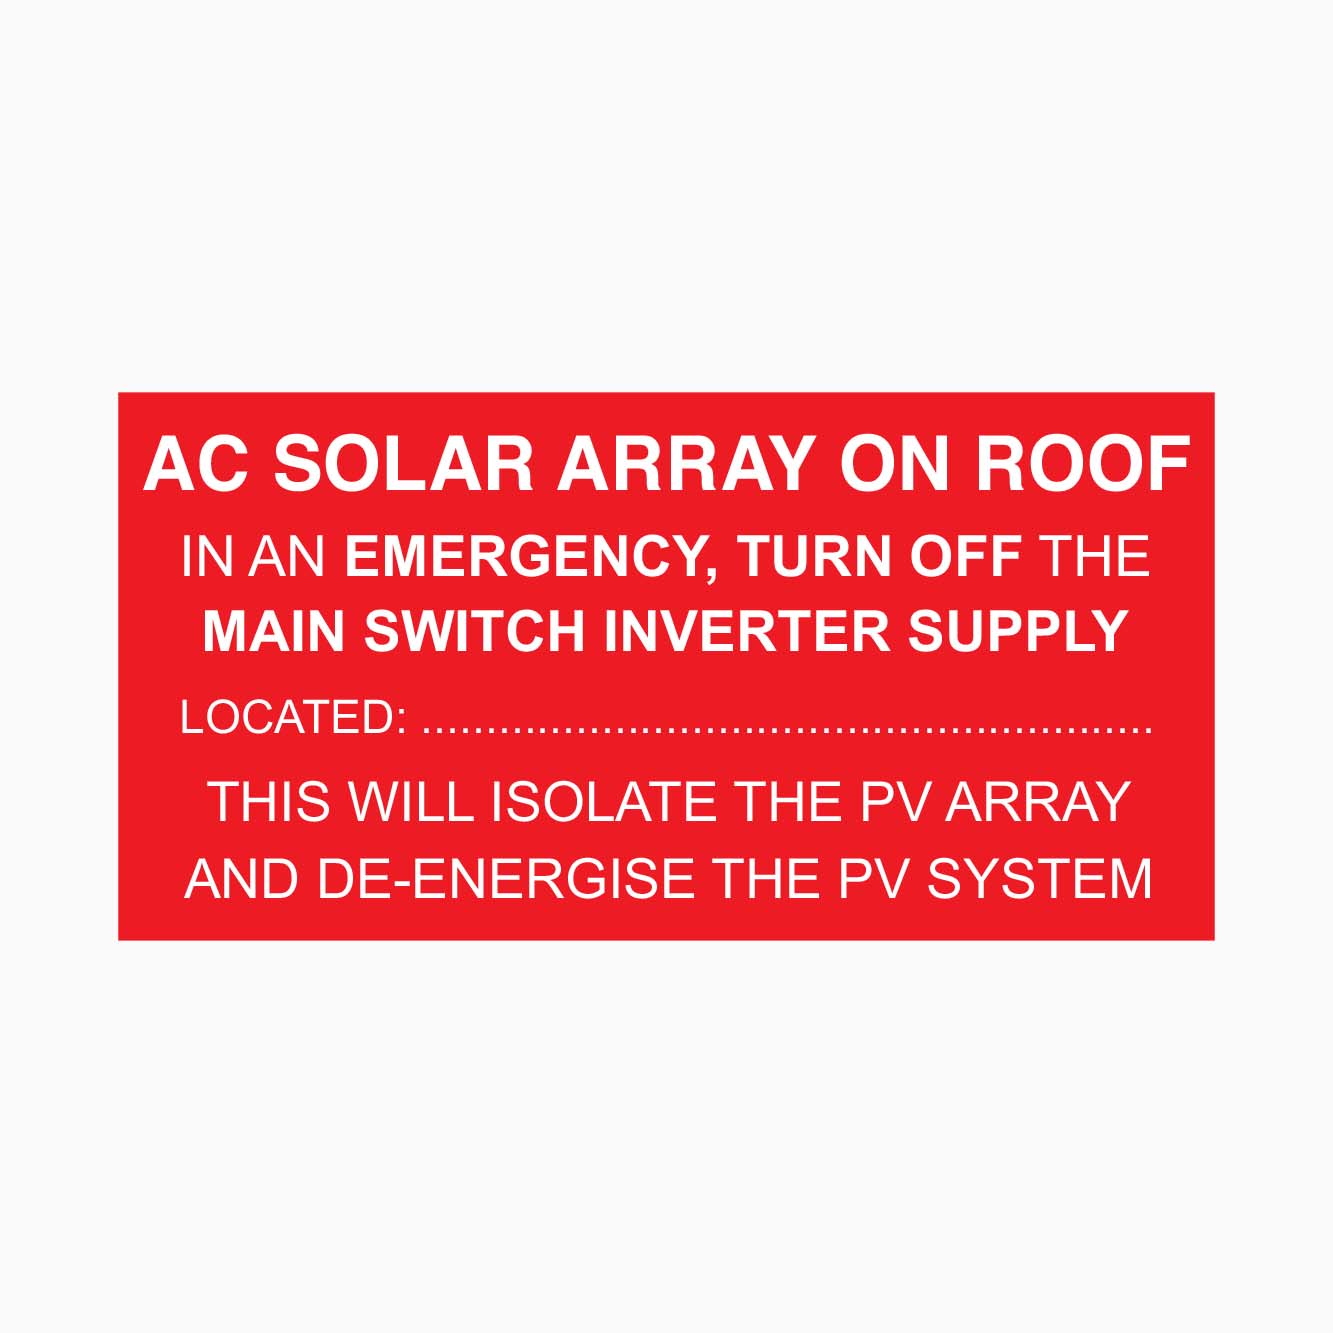 AC SOLAR ARRAY ON ROOF IN AN EMERGENCY, TURN OFF THE MAIN SWITCH INVERTER SUPPLY SIGN - GET SIGNS